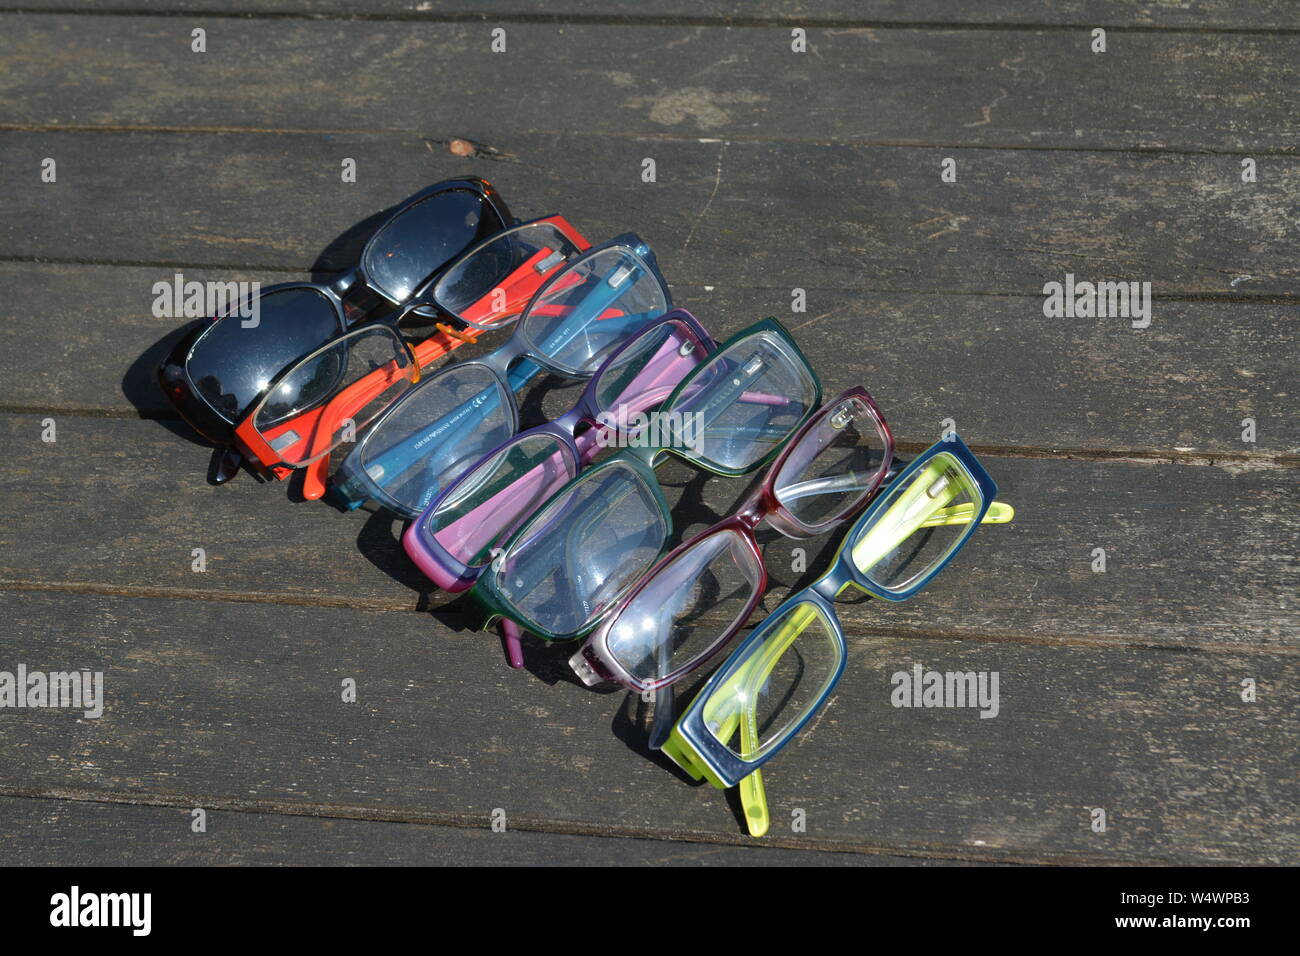 Large number of different framed folded spectacles glasses arranged in a regular pattern on a wooden slatted surface in bright sunlight Stock Photo